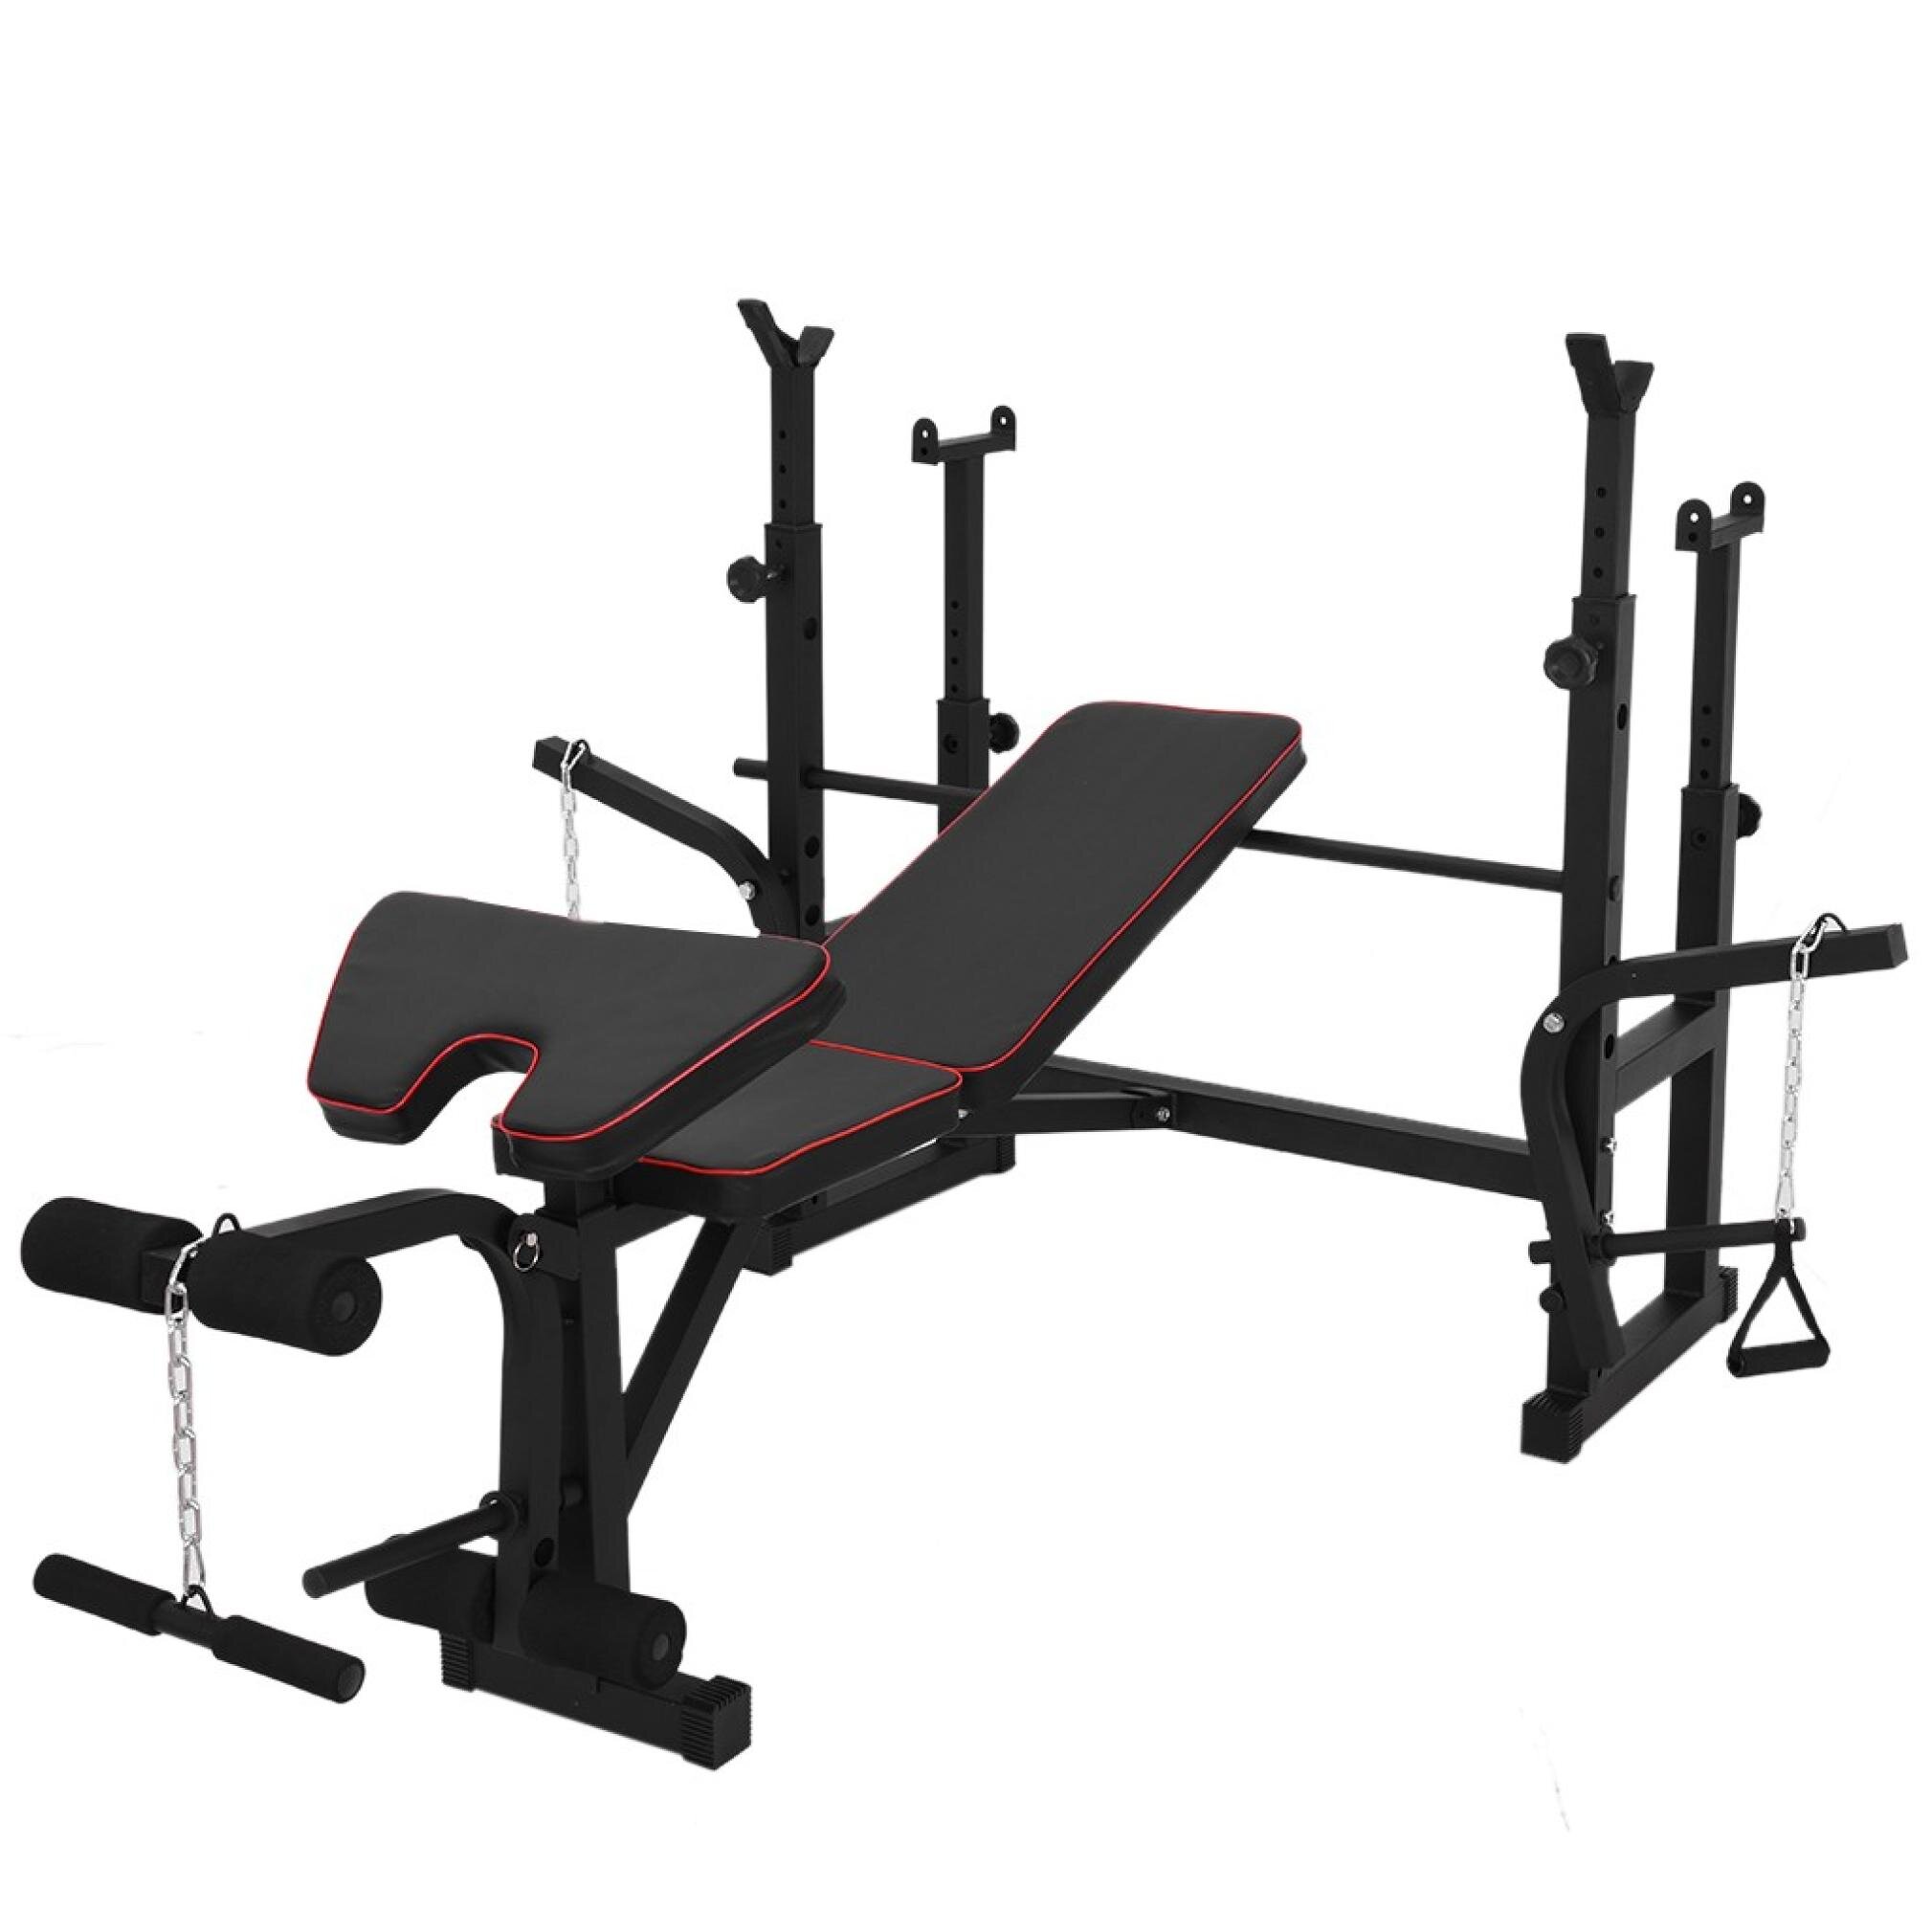 Details about   Adjustable Bench Multifunctional Weightlifting Bed Foldable Bench Roman Bench 